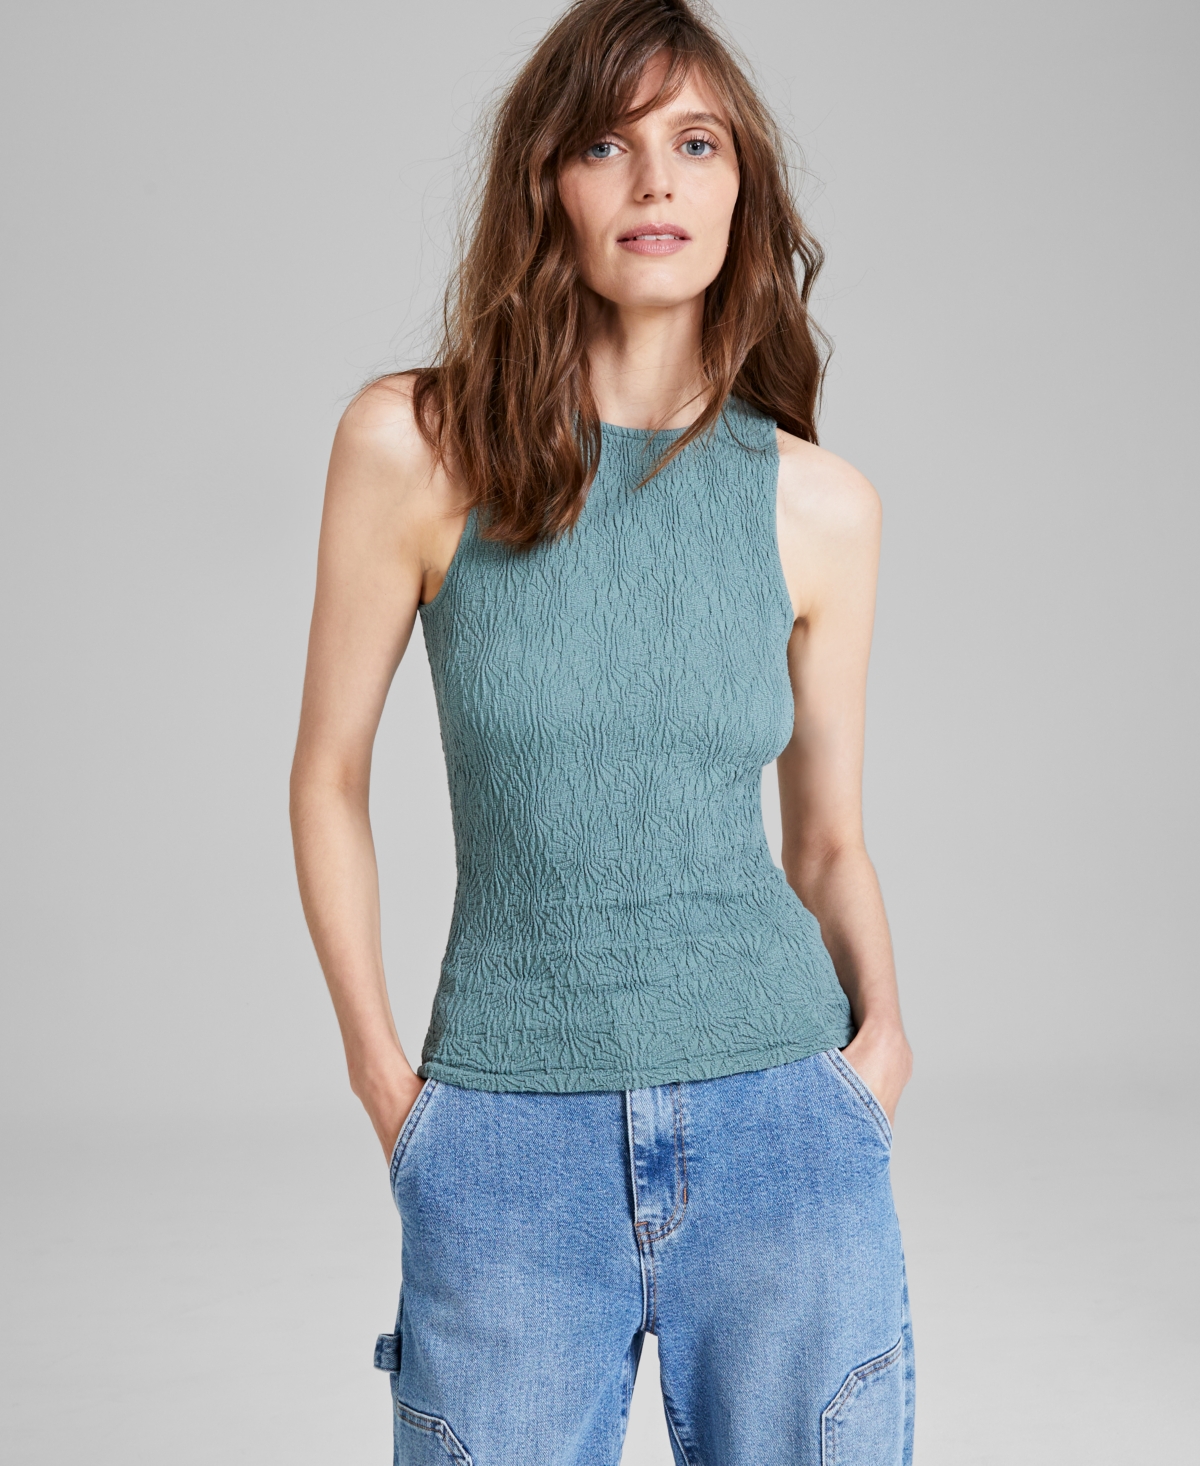 Women's Textured Sleeveless Tank Top, Created for Macy's - Saxifrage